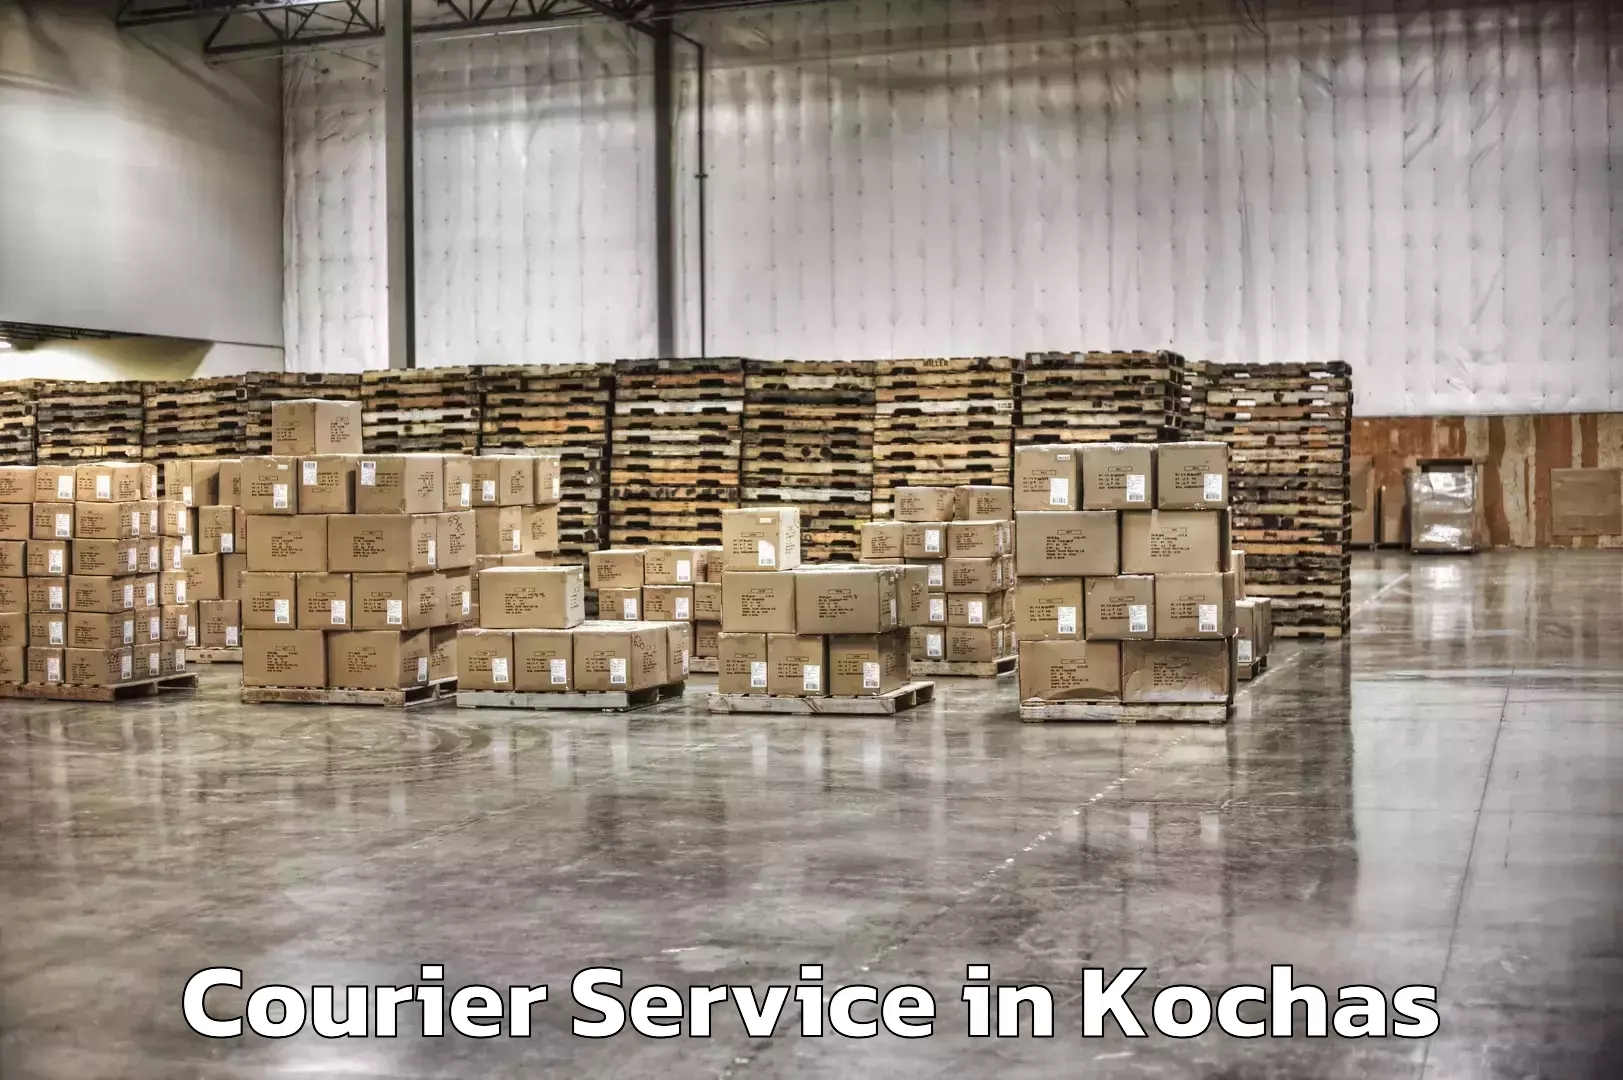 End-to-end delivery in Kochas